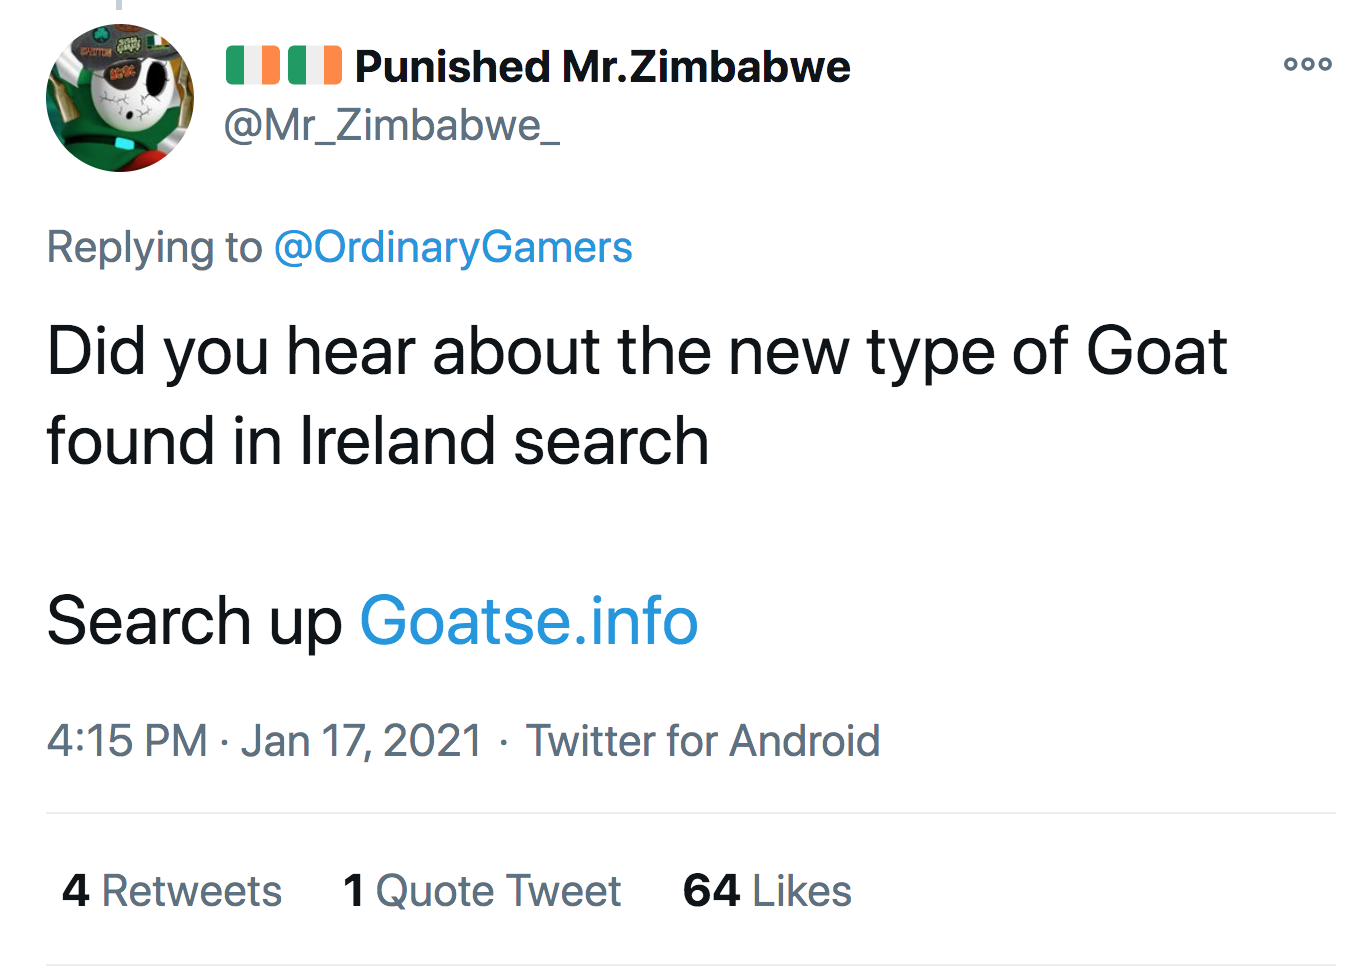 visje posters - co Patoh Grey ooo Punished Mr.Zimbabwe Did you hear about the new type of Goat found in Ireland search Search up Goatse.info Twitter for Android 4 1 Quote Tweet 64